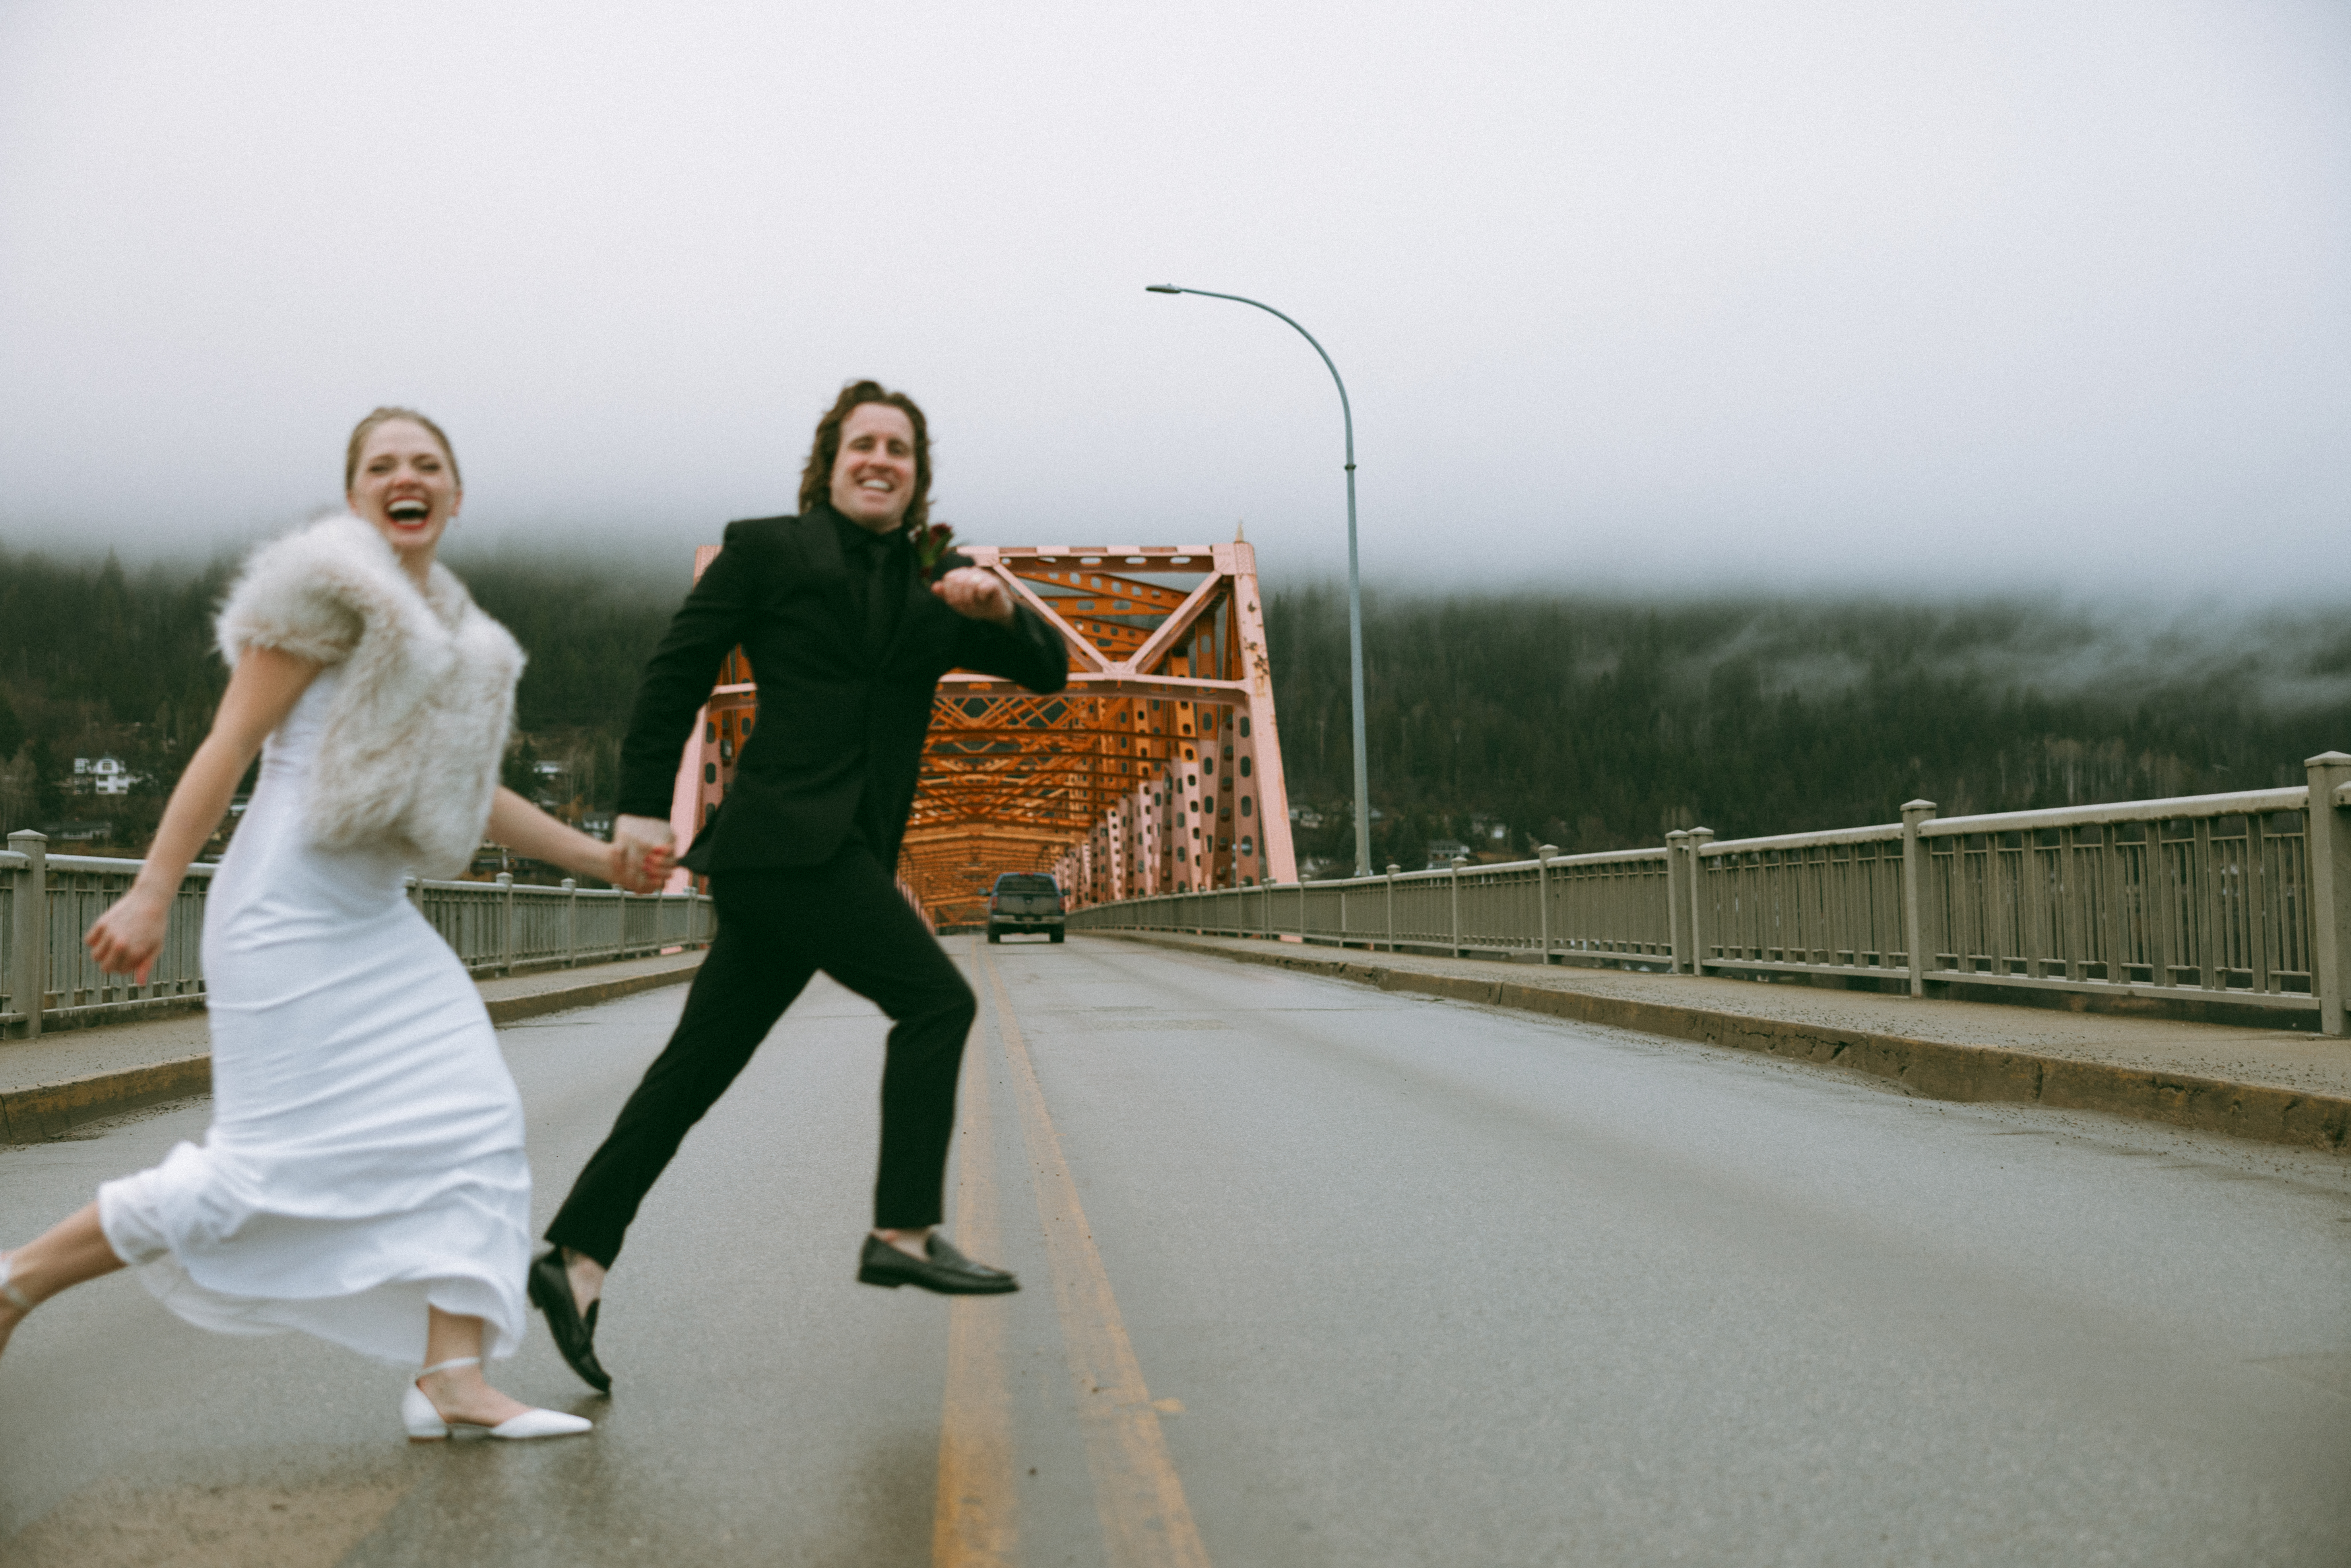 A bride and groom hold hands while running playfully across a road, with a big orange bridge in the background. West Kootenay Wedding Photographer Nelson BC Elopement